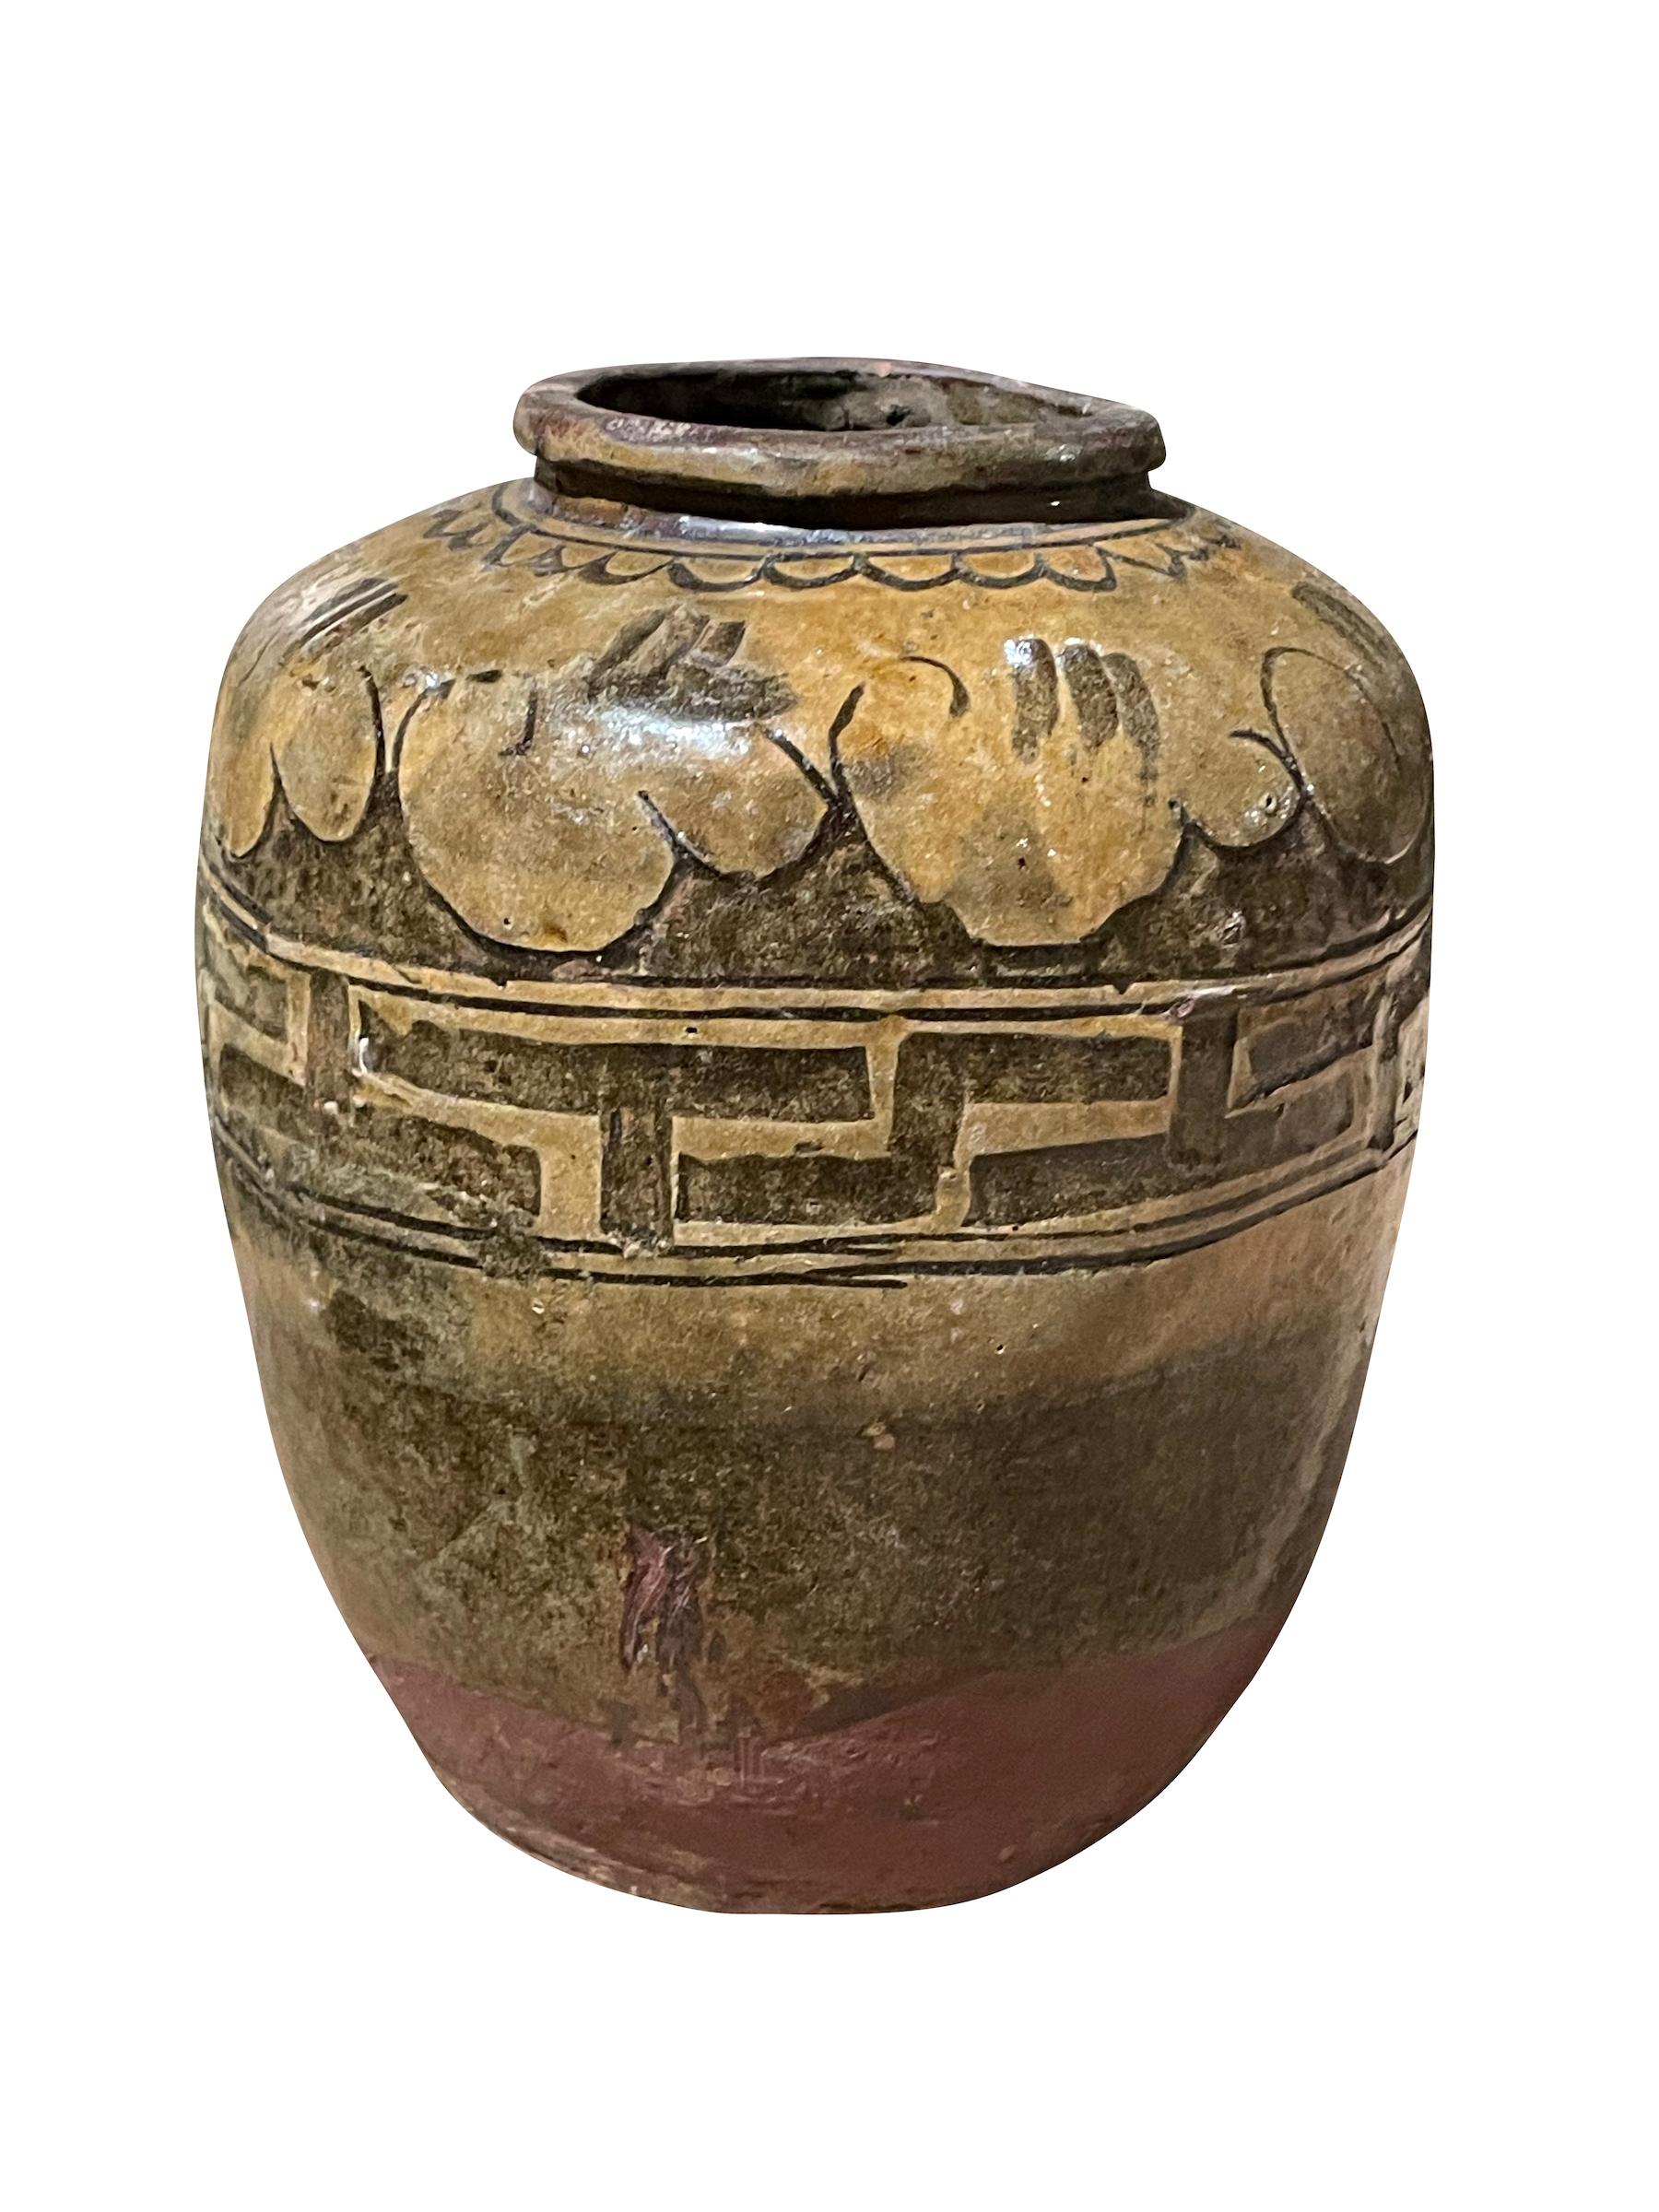 19th century Chinese olive and gold glaze barrel shaped vase.
Decorative geometric design.
Natural weathered patina and wear.
Part of a large collection.
